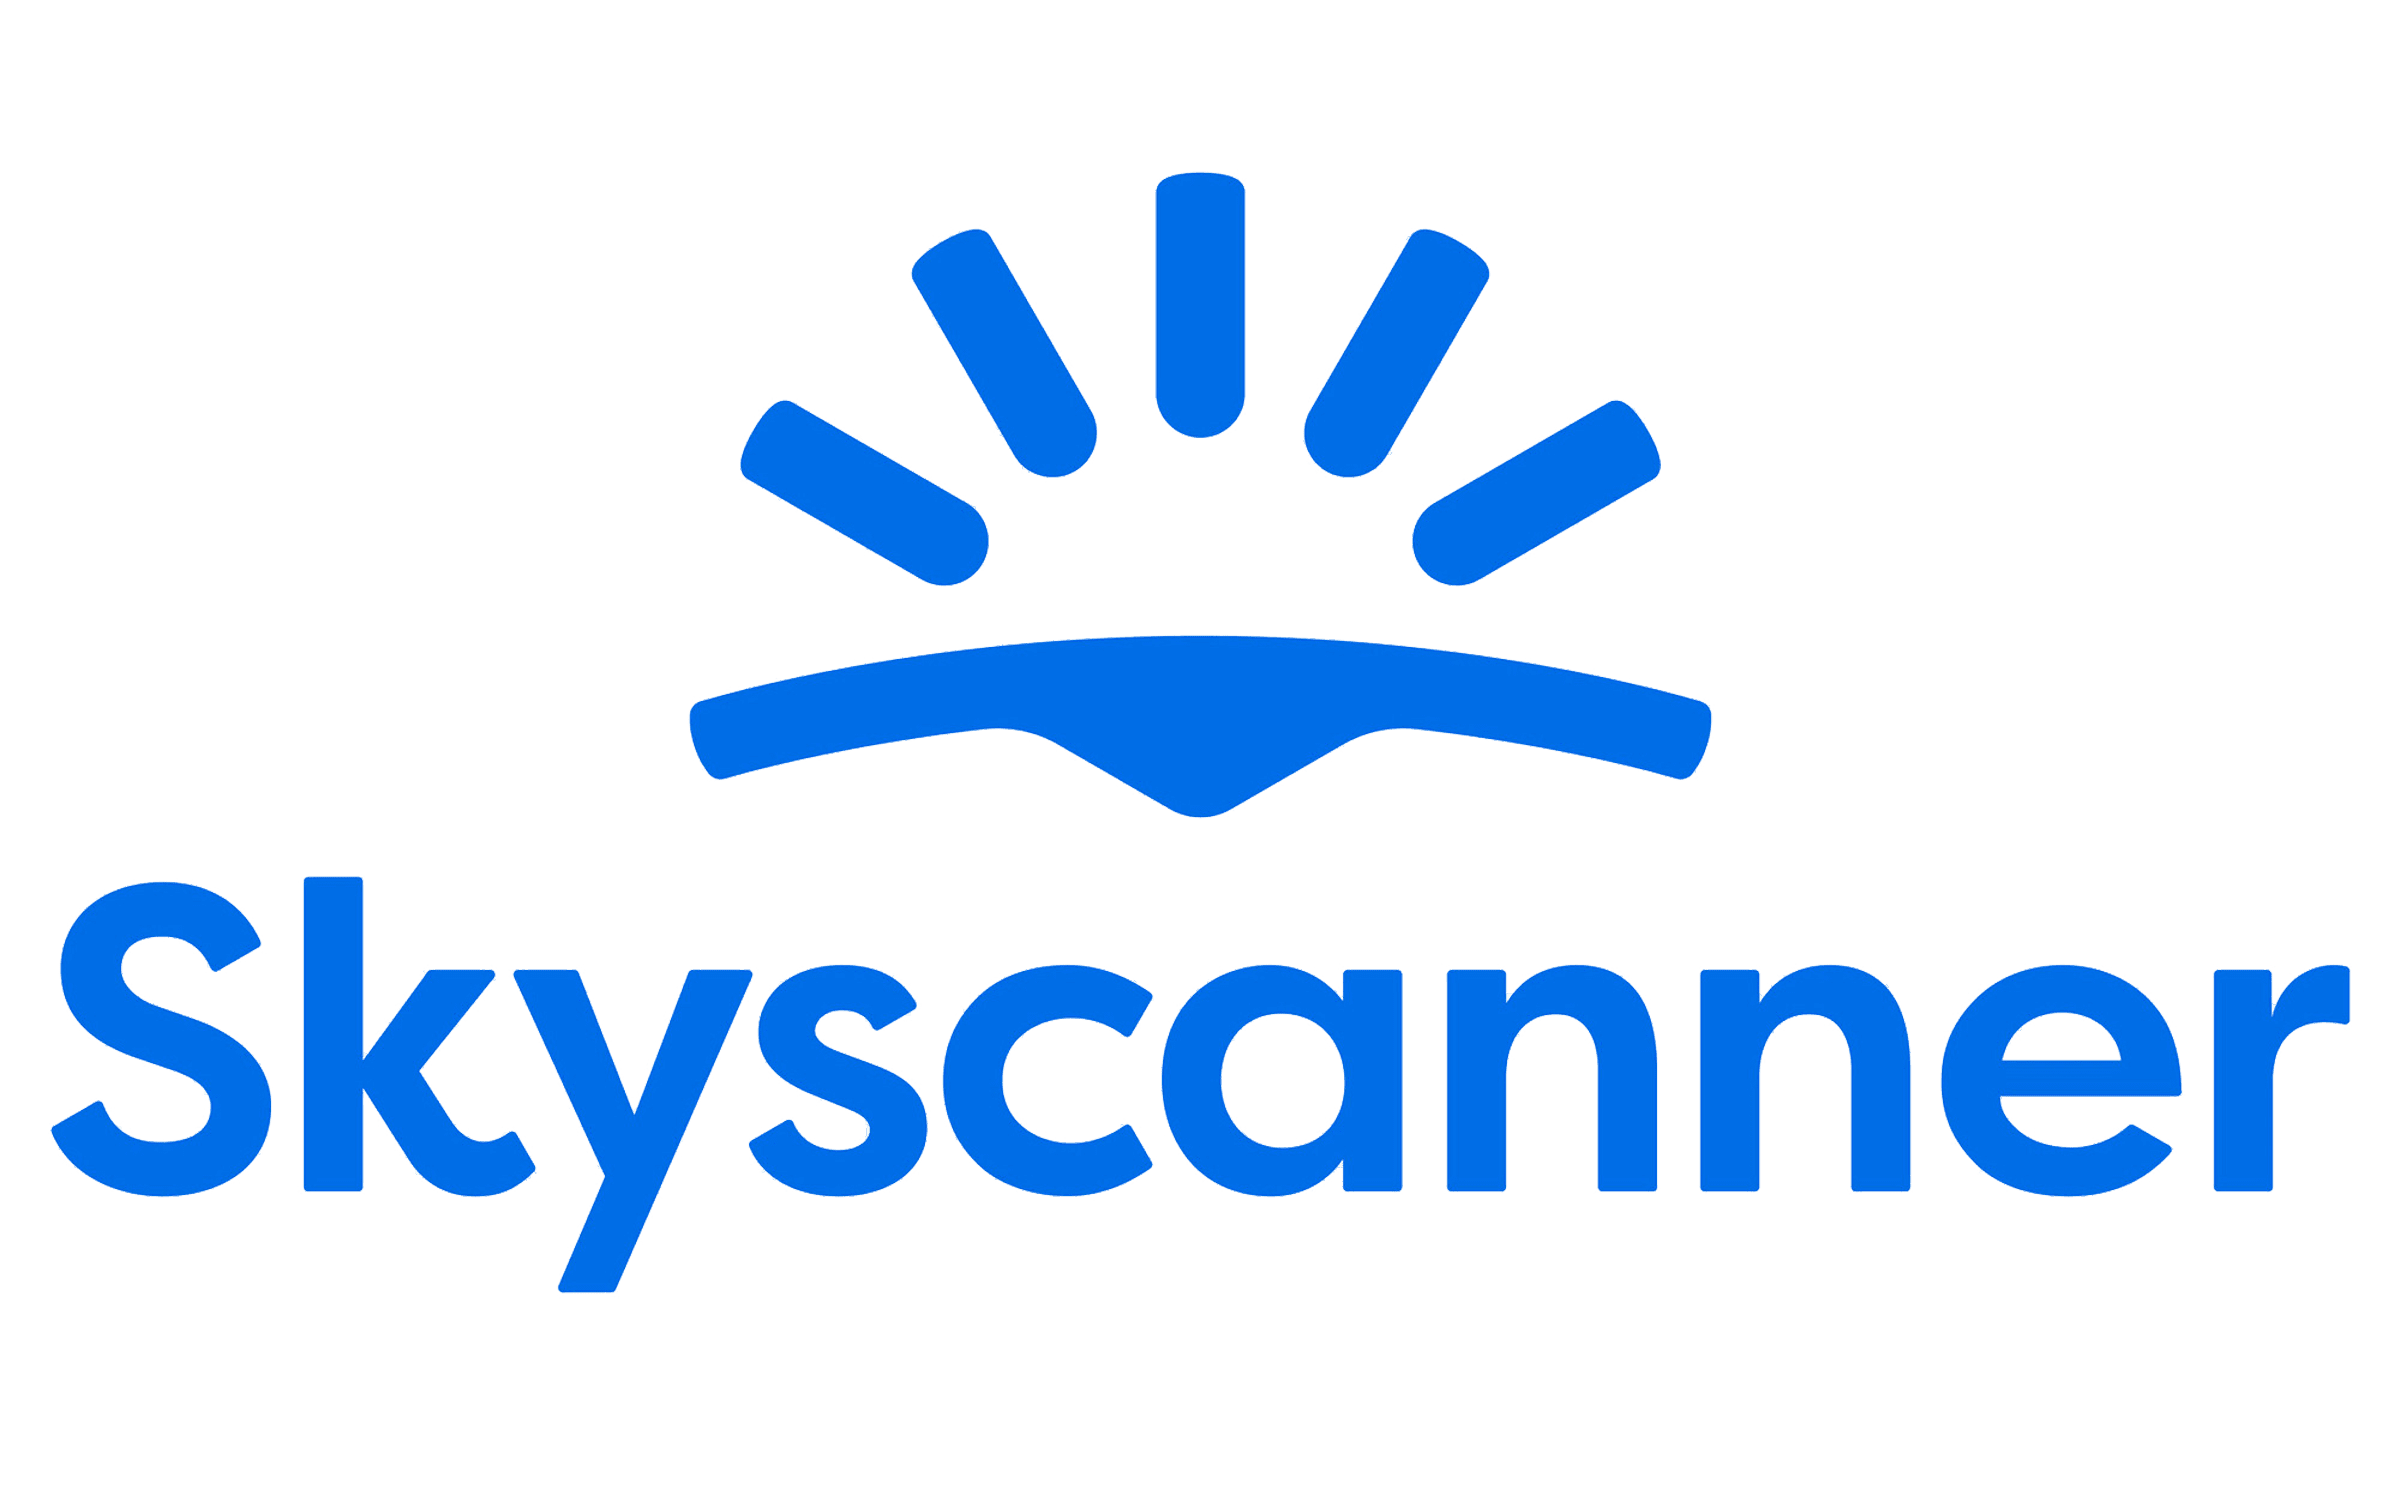 Skyscanner logo - the word Skyscanner with sunshine illustration above it